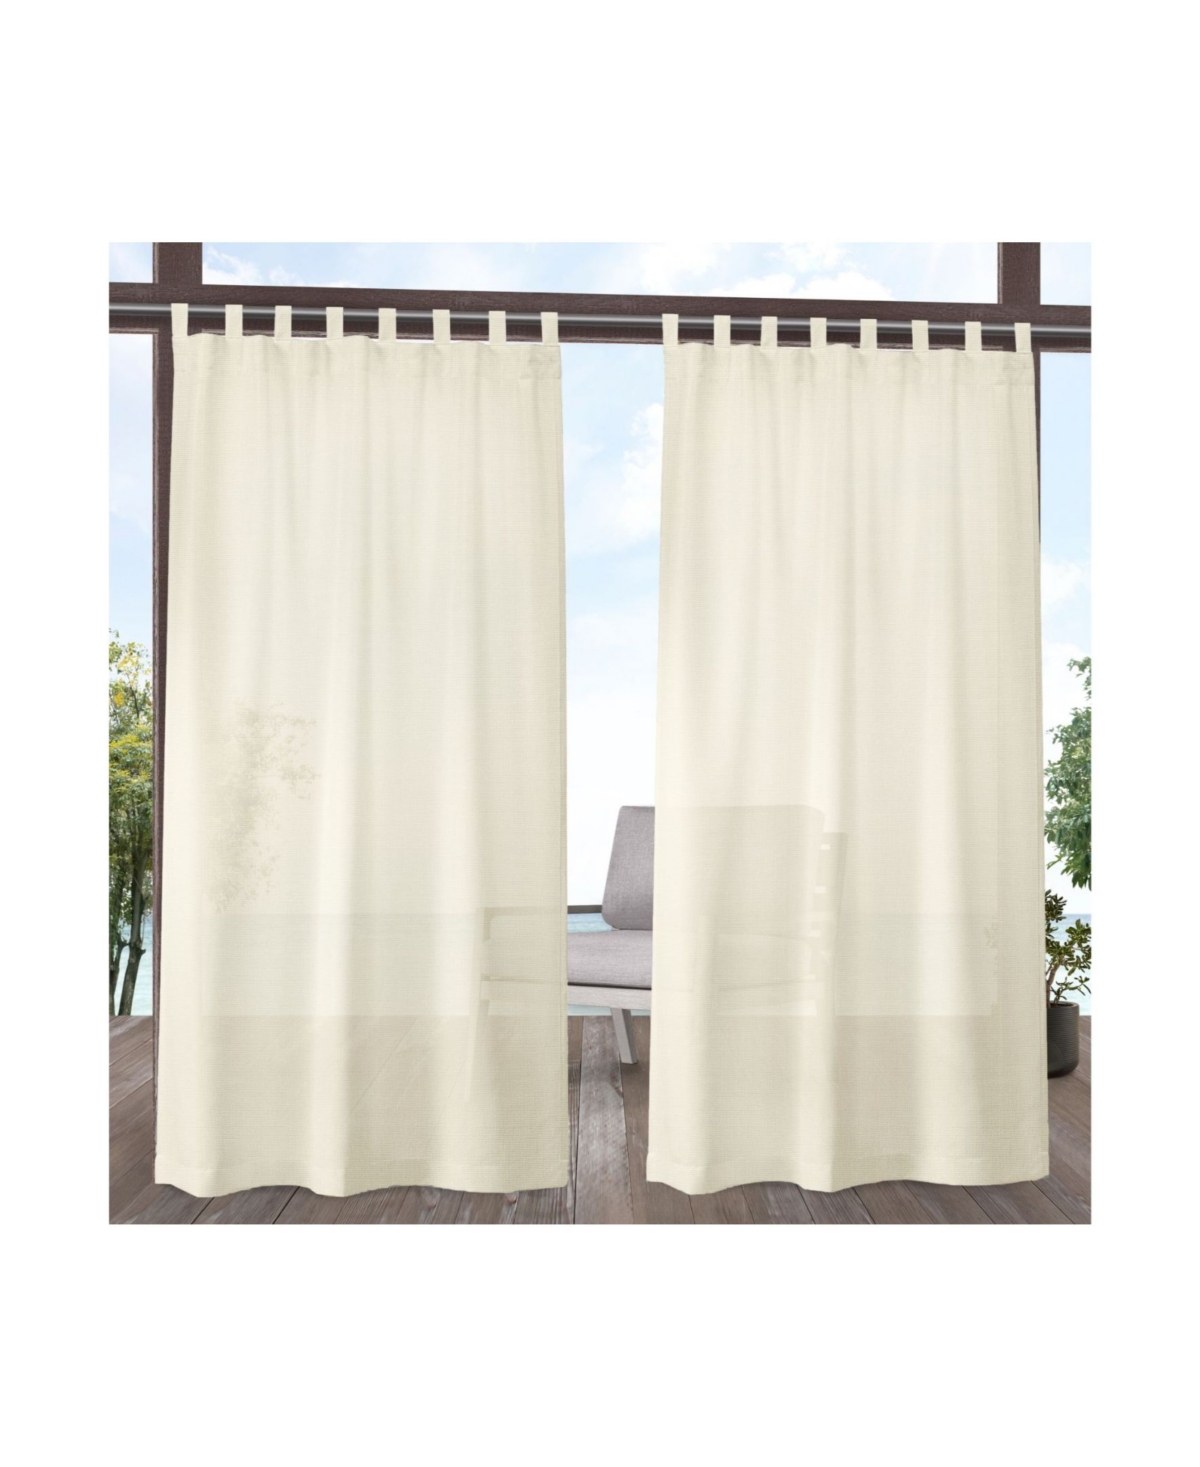 Curtains Miami Indoor - Outdoor Tab Top Curtain Panel Pair, 54" x 84" - Ivory